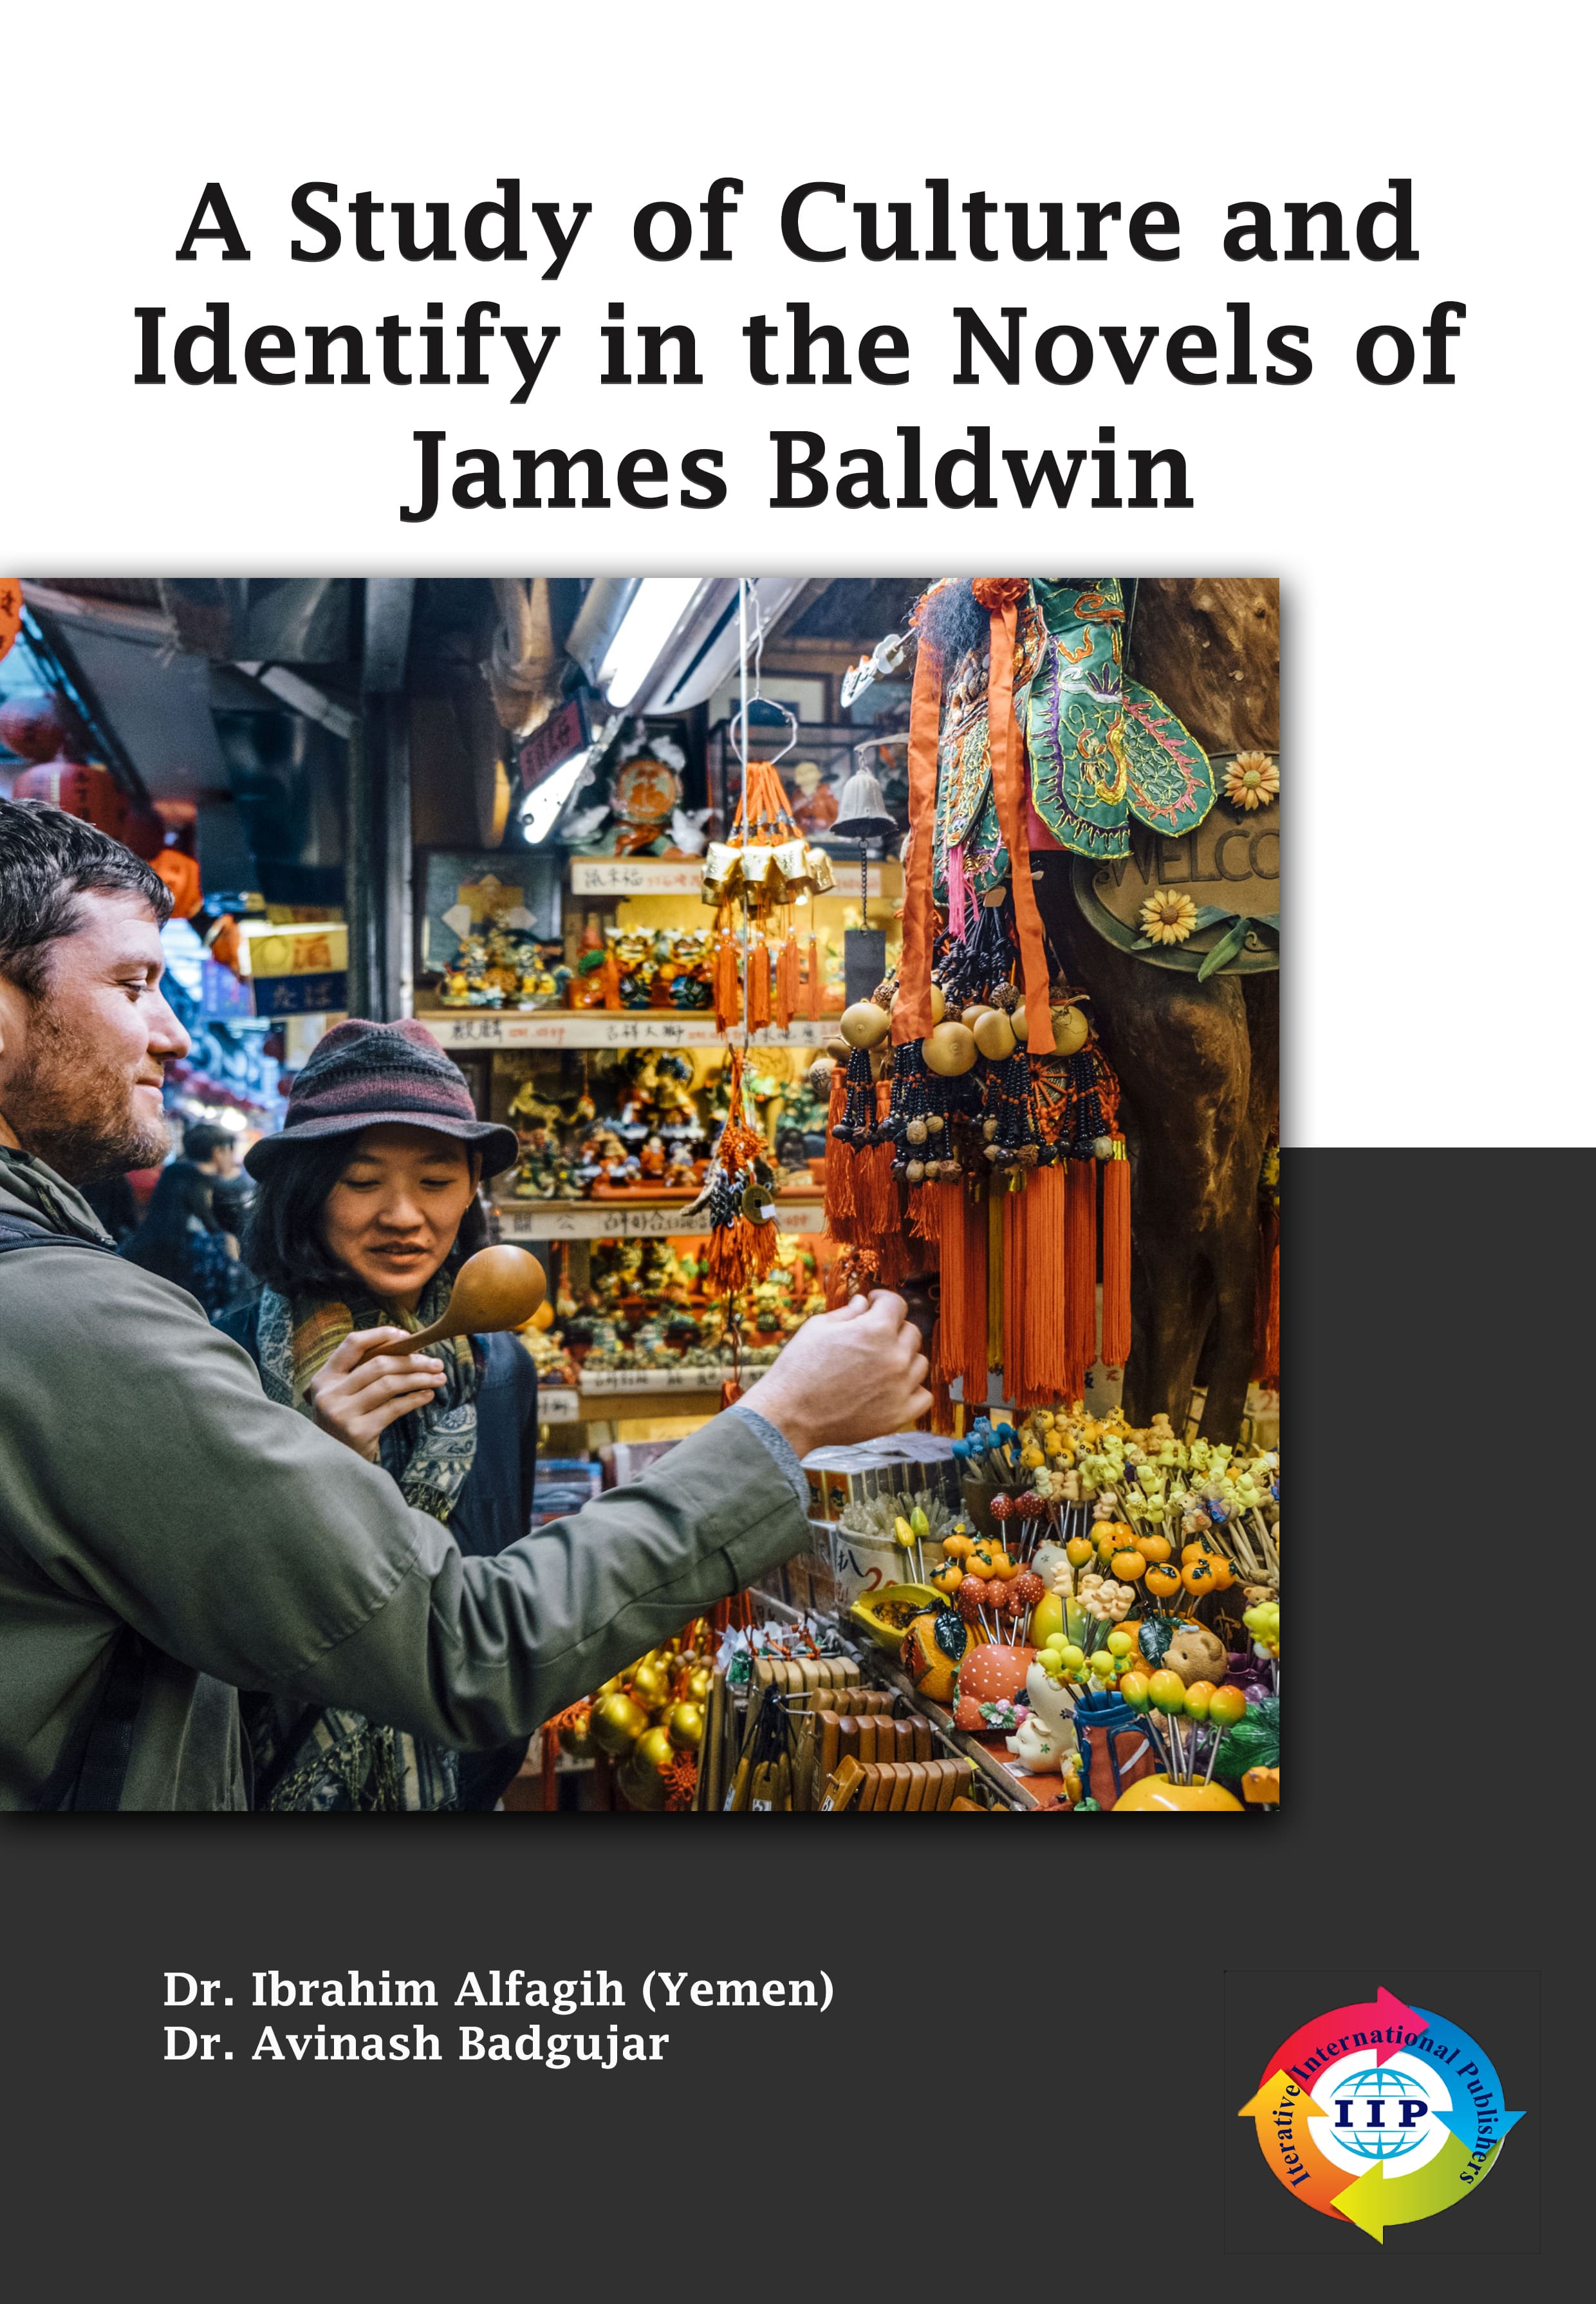 A STUDY OF CULTURE AND IDENTIFY IN THE NOVELS OF JAMES BALDWIN